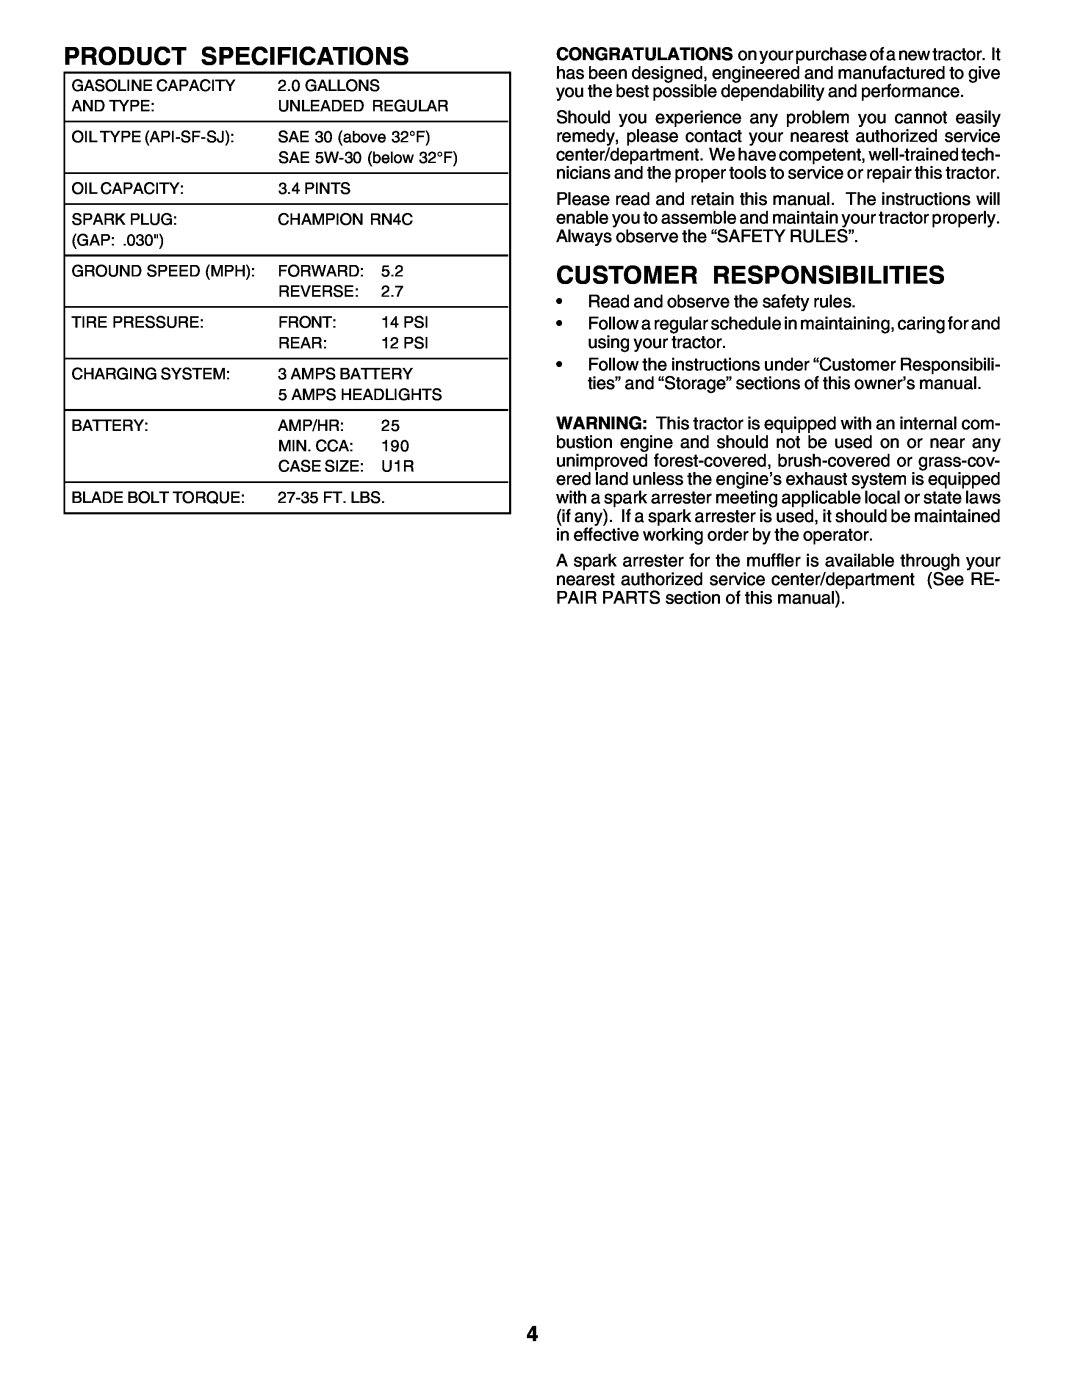 Weed Eater 178704 manual Product Specifications, Customer Responsibilities 